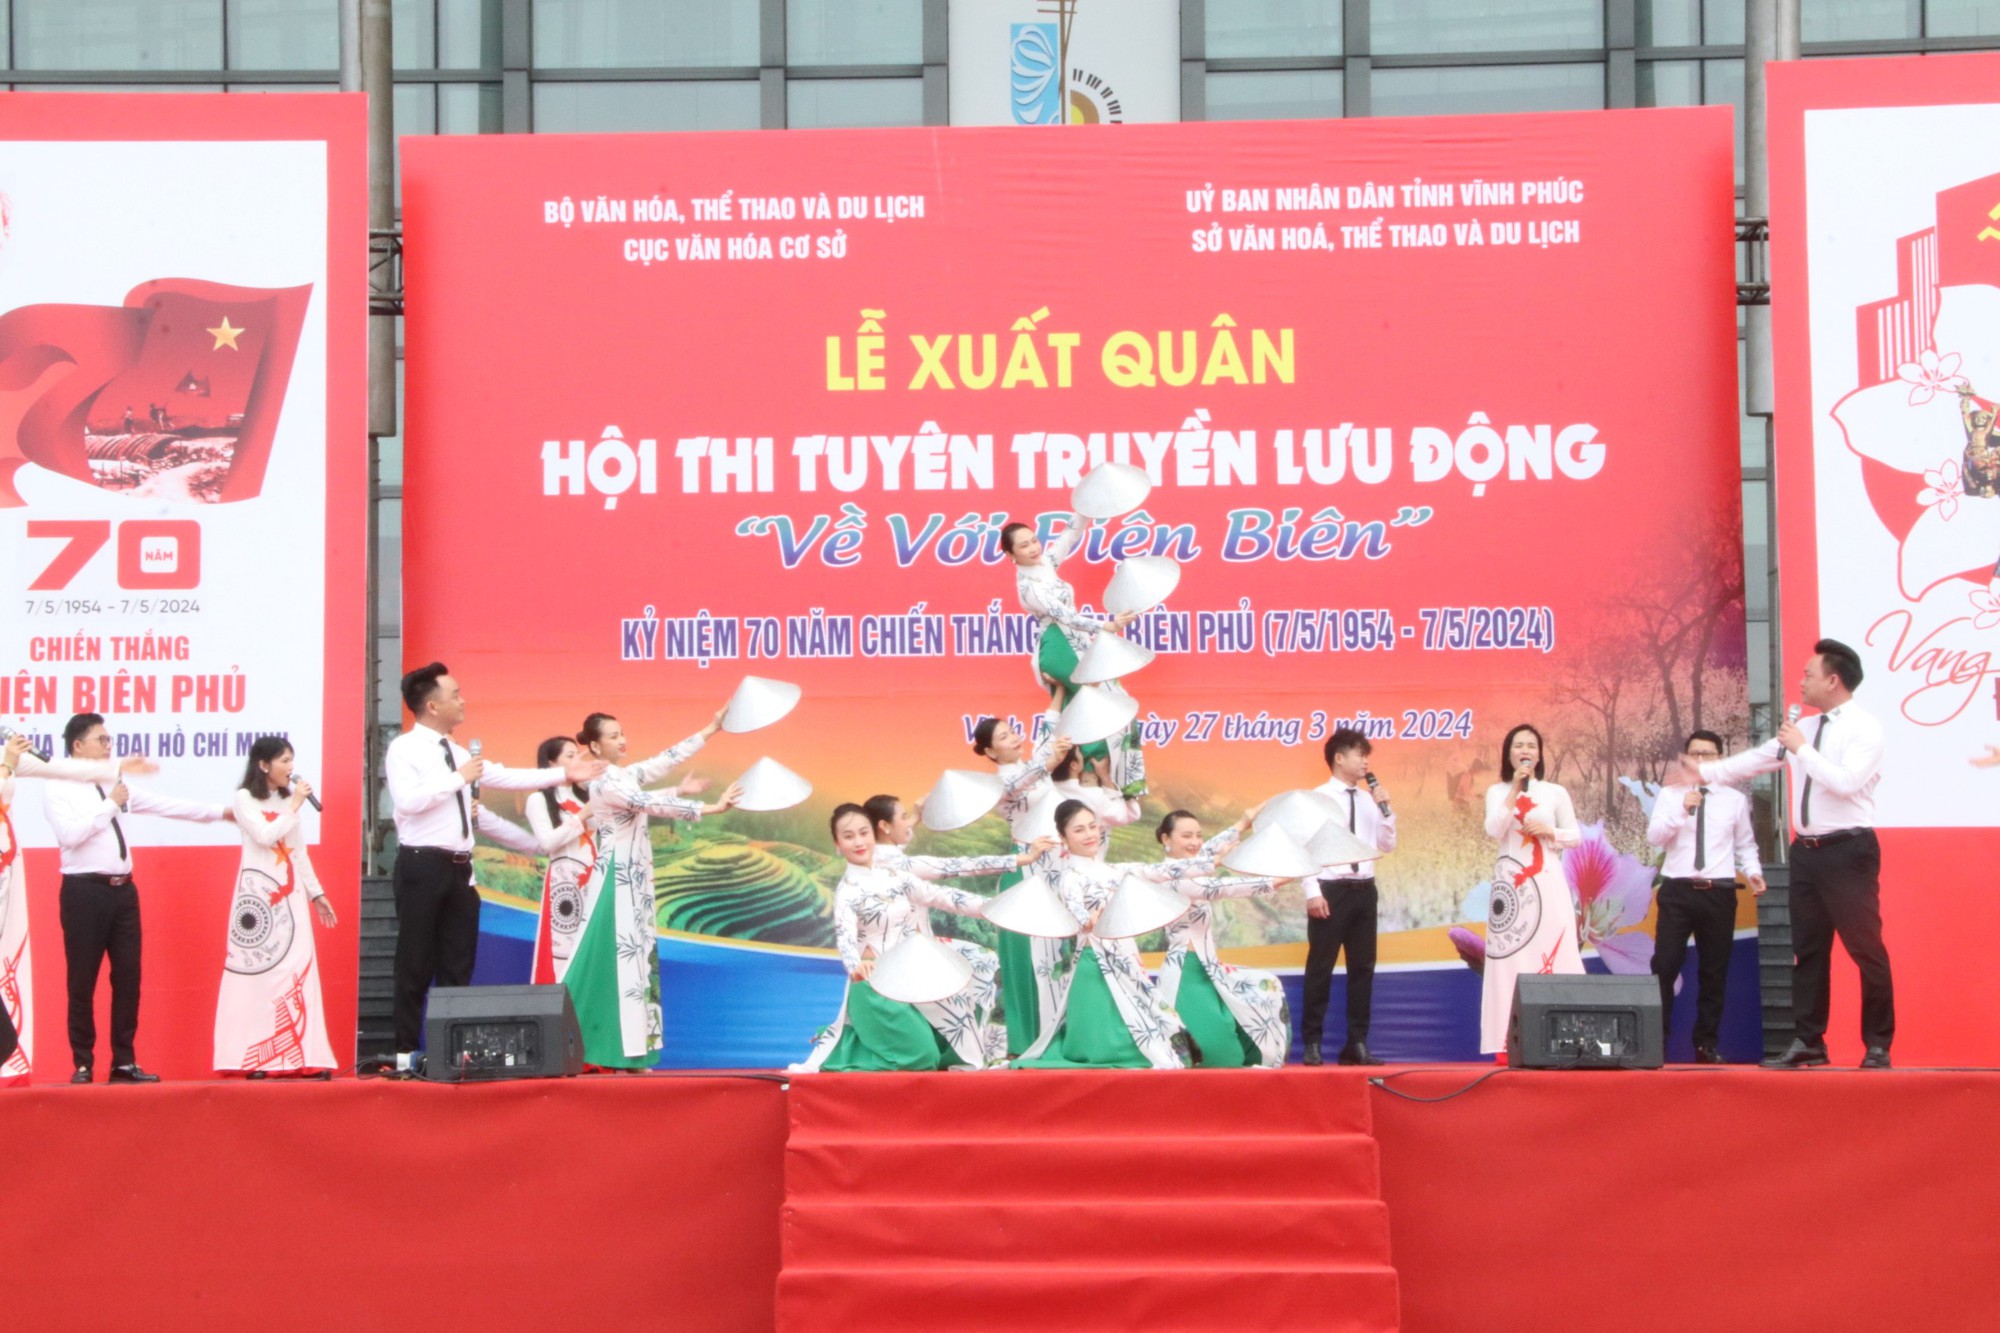 Mobile propaganda contest celebrating the 70th anniversary of the Dien Bien Phu Victory (May 7, 5 - May 1954, 7) - Photo 5.